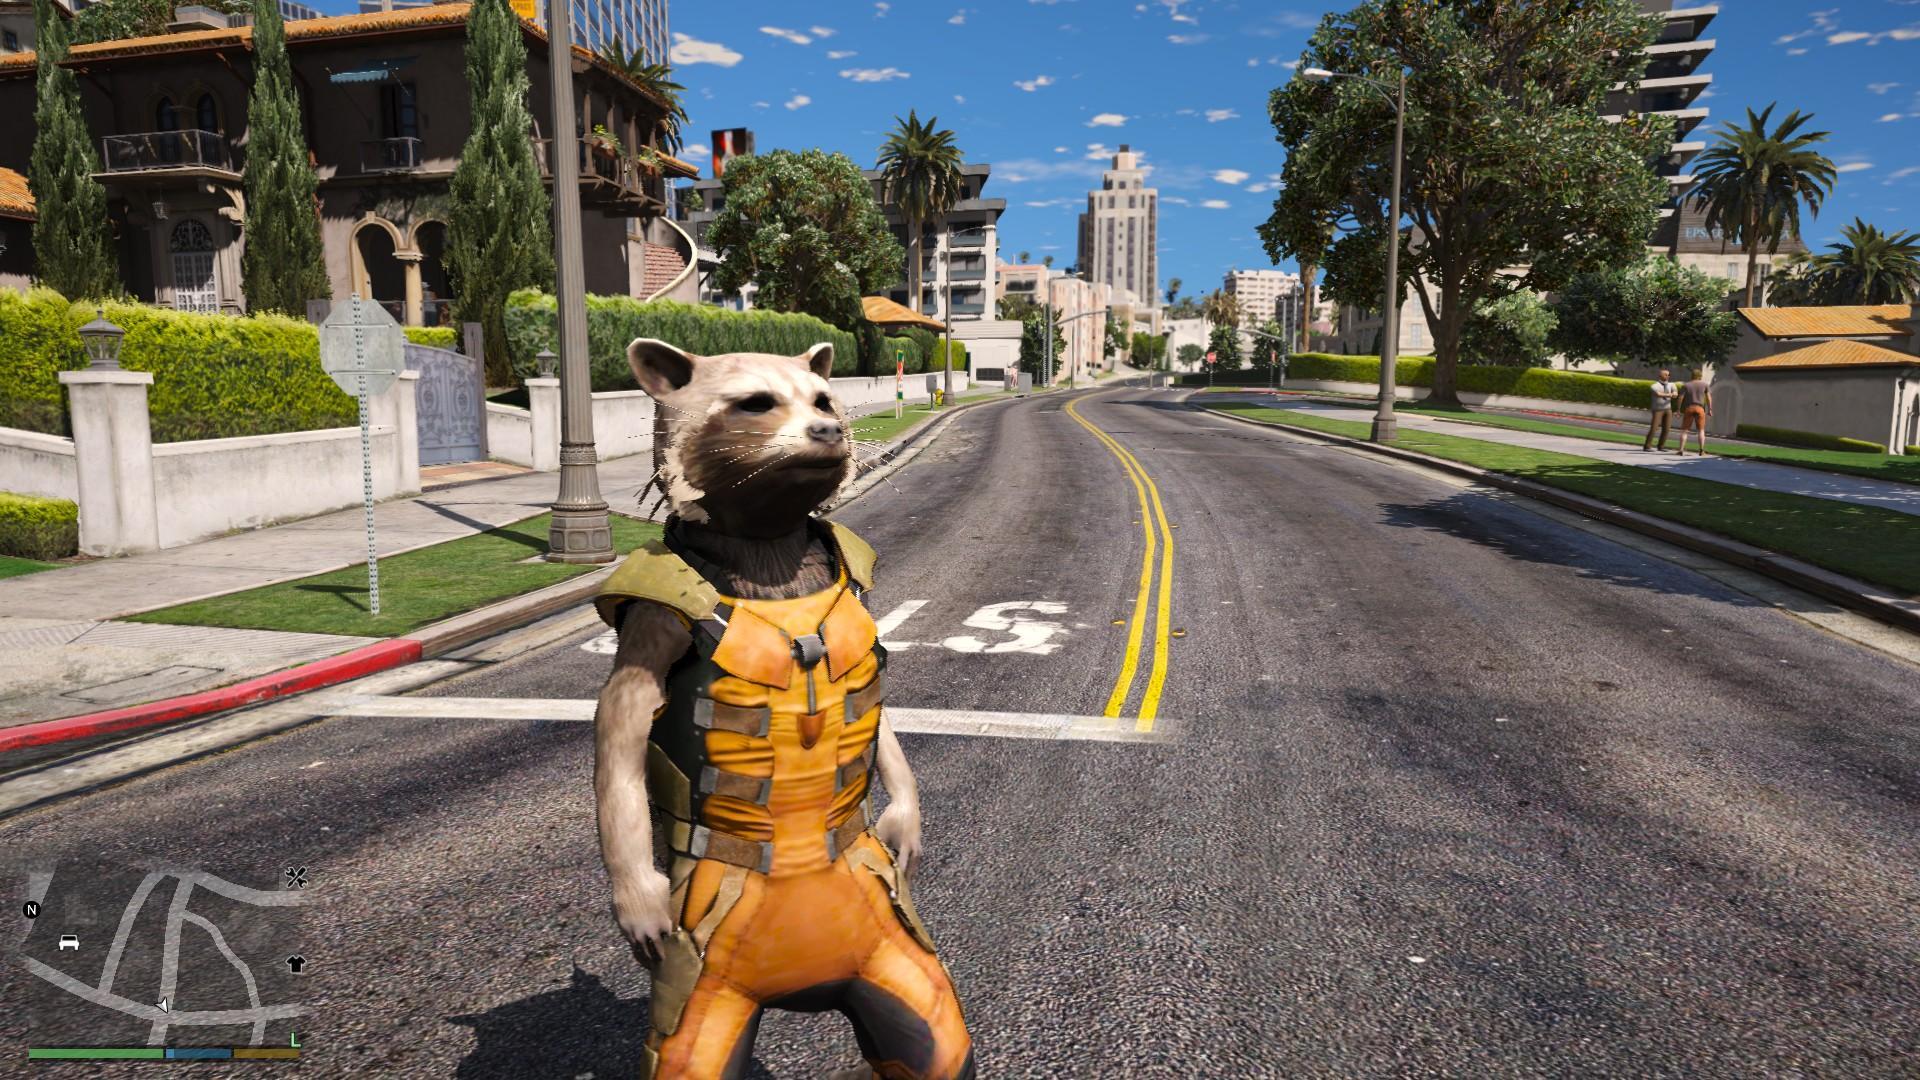 Rocket Raccoon from Guardians of the Galaxy - Big & smalls version [Add-On / Replace PED]